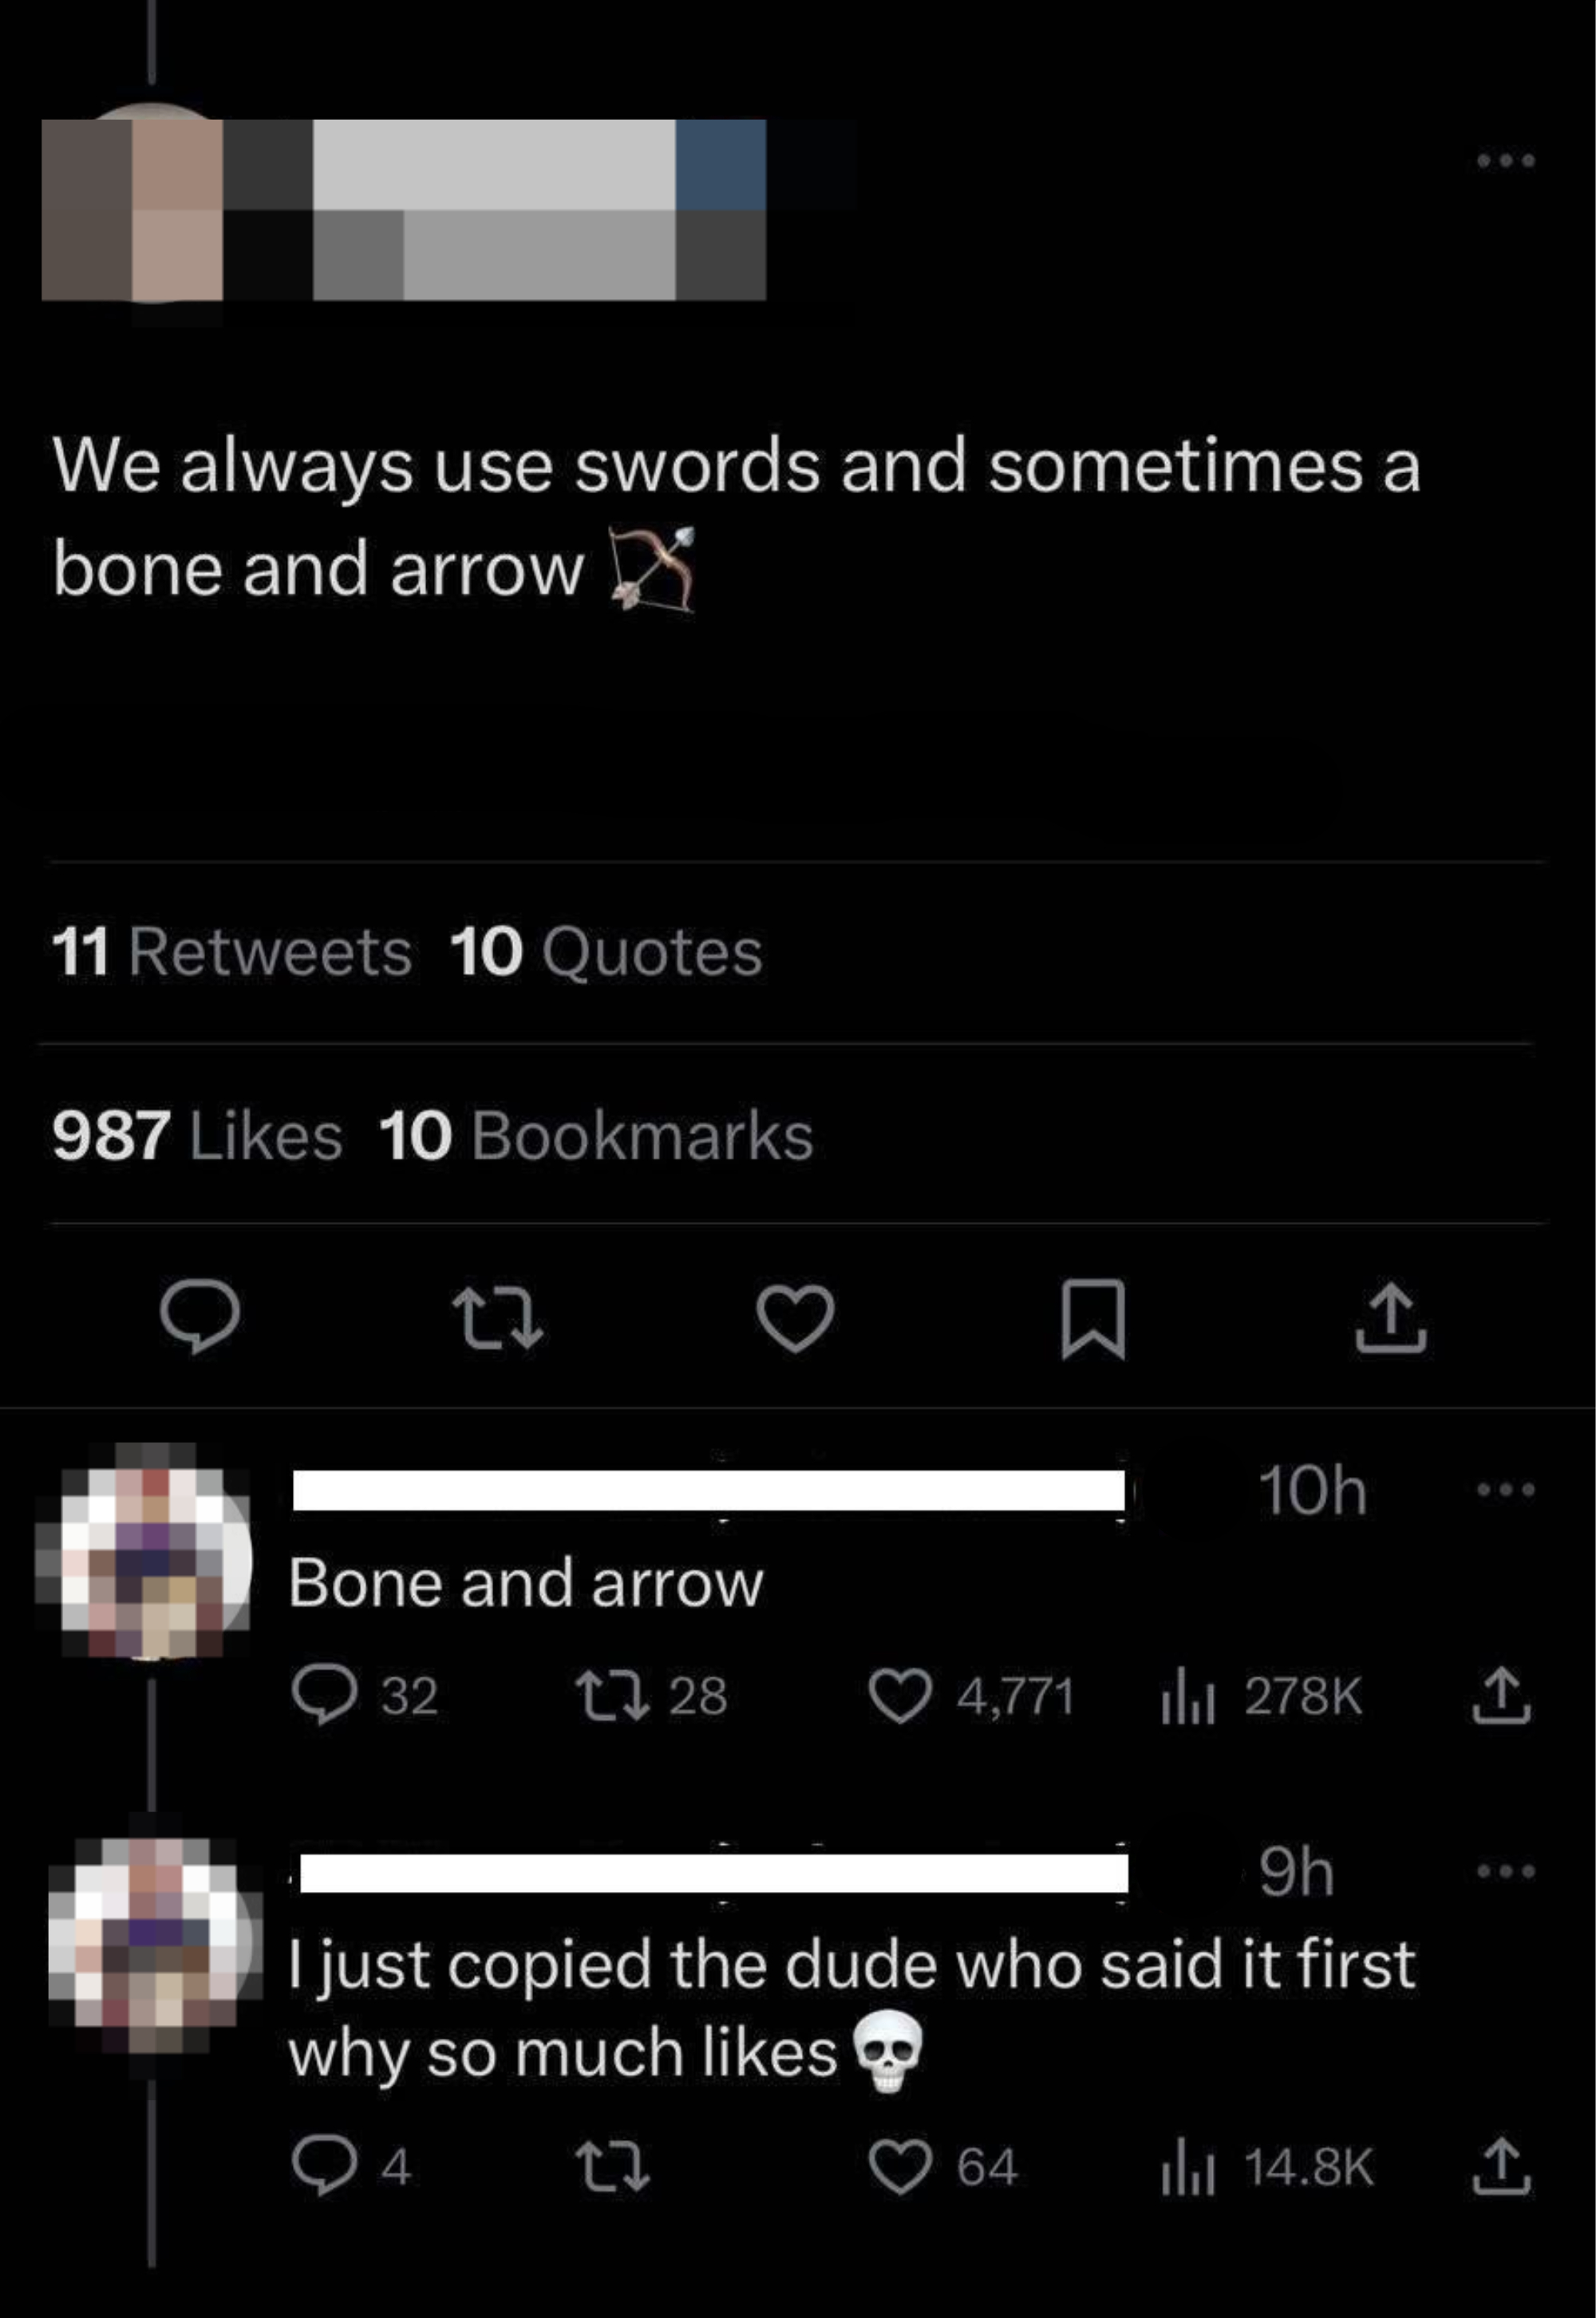 &quot;We often use swords and sometimes a bone and arrow&quot;